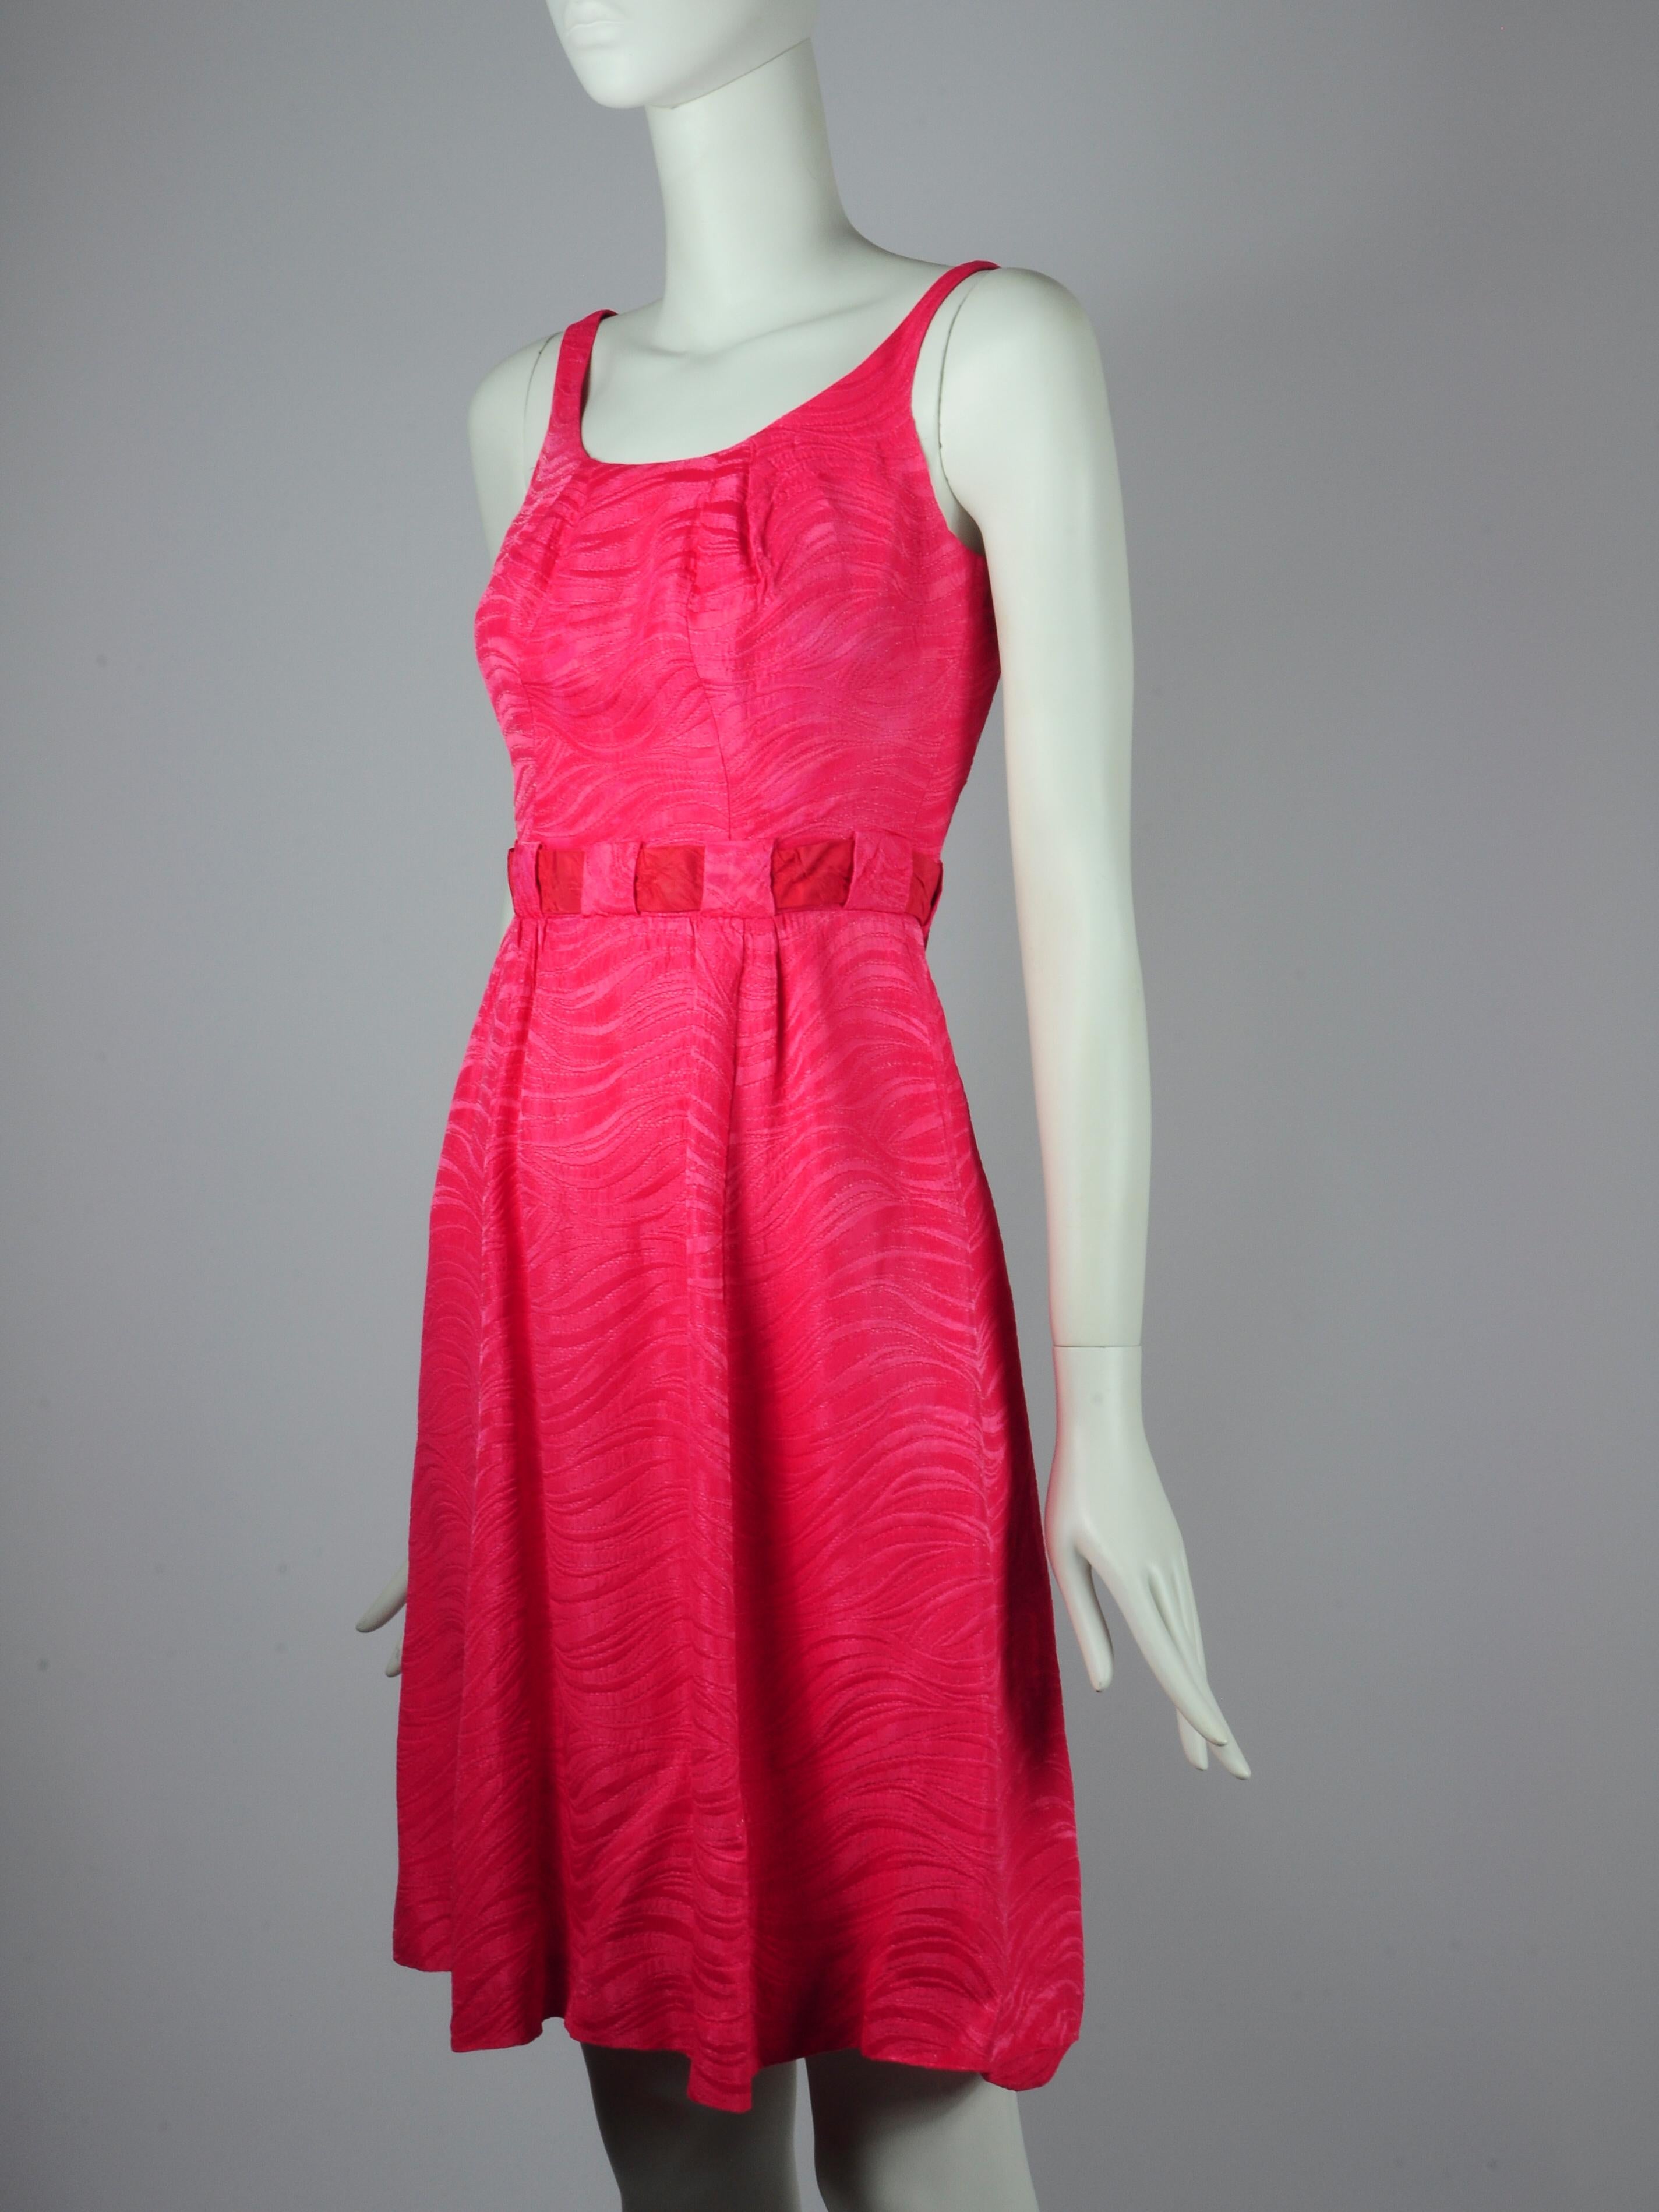 Jean Allen London Dress and Jacket Two Piece Set in Fuchsia Pink with Bow Detail For Sale 1